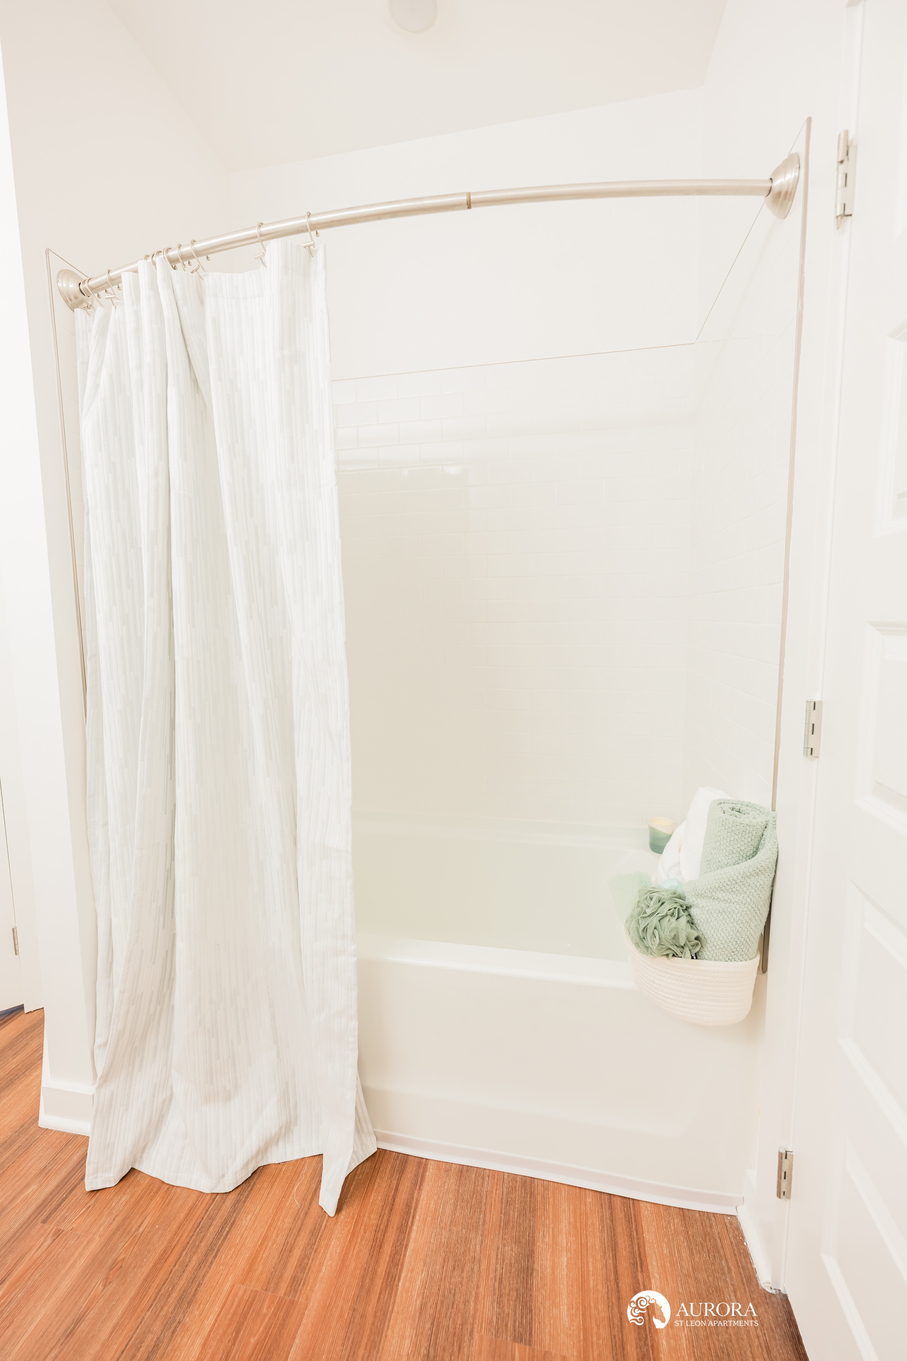 A bathroom with a white shower curtain and wooden floors in a 42 Apartment Property Management.